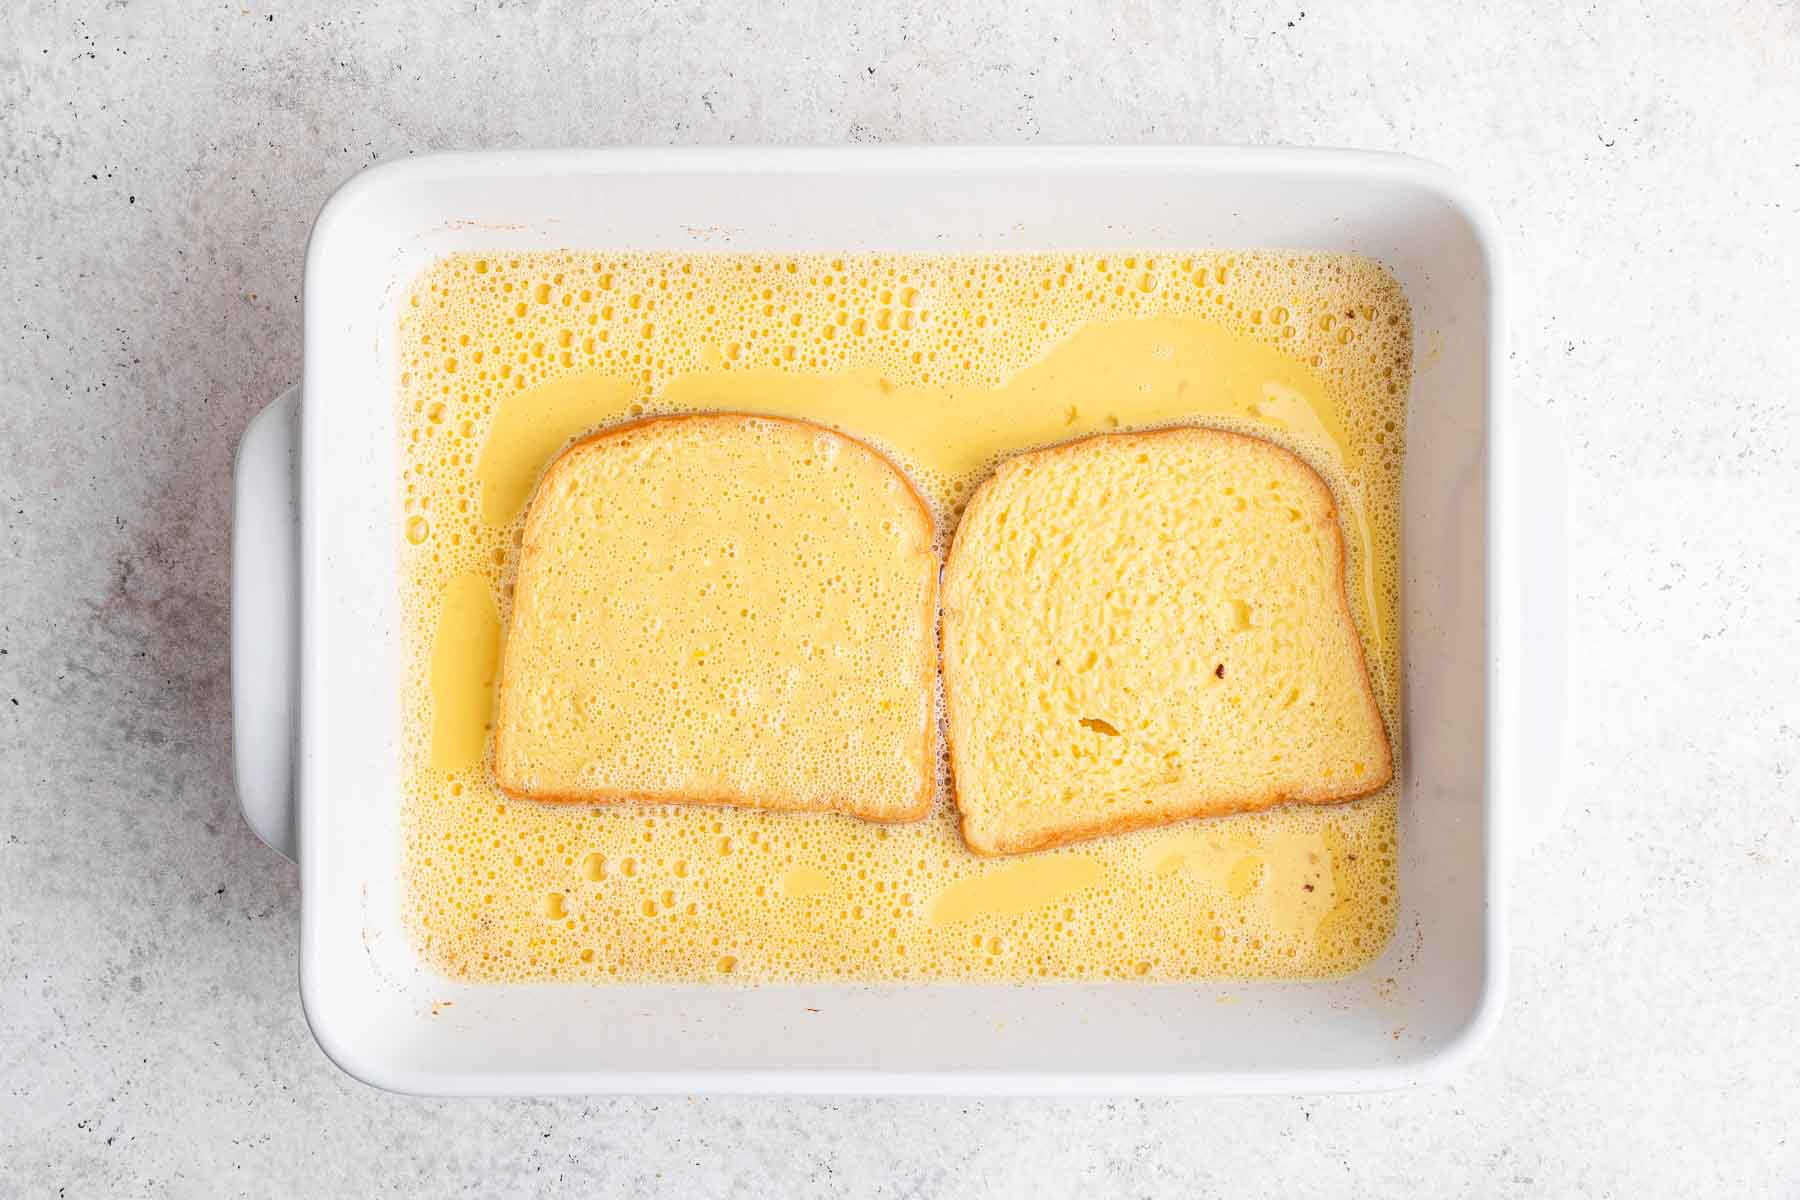 Two slices of bread soaking in yellow egg custard.